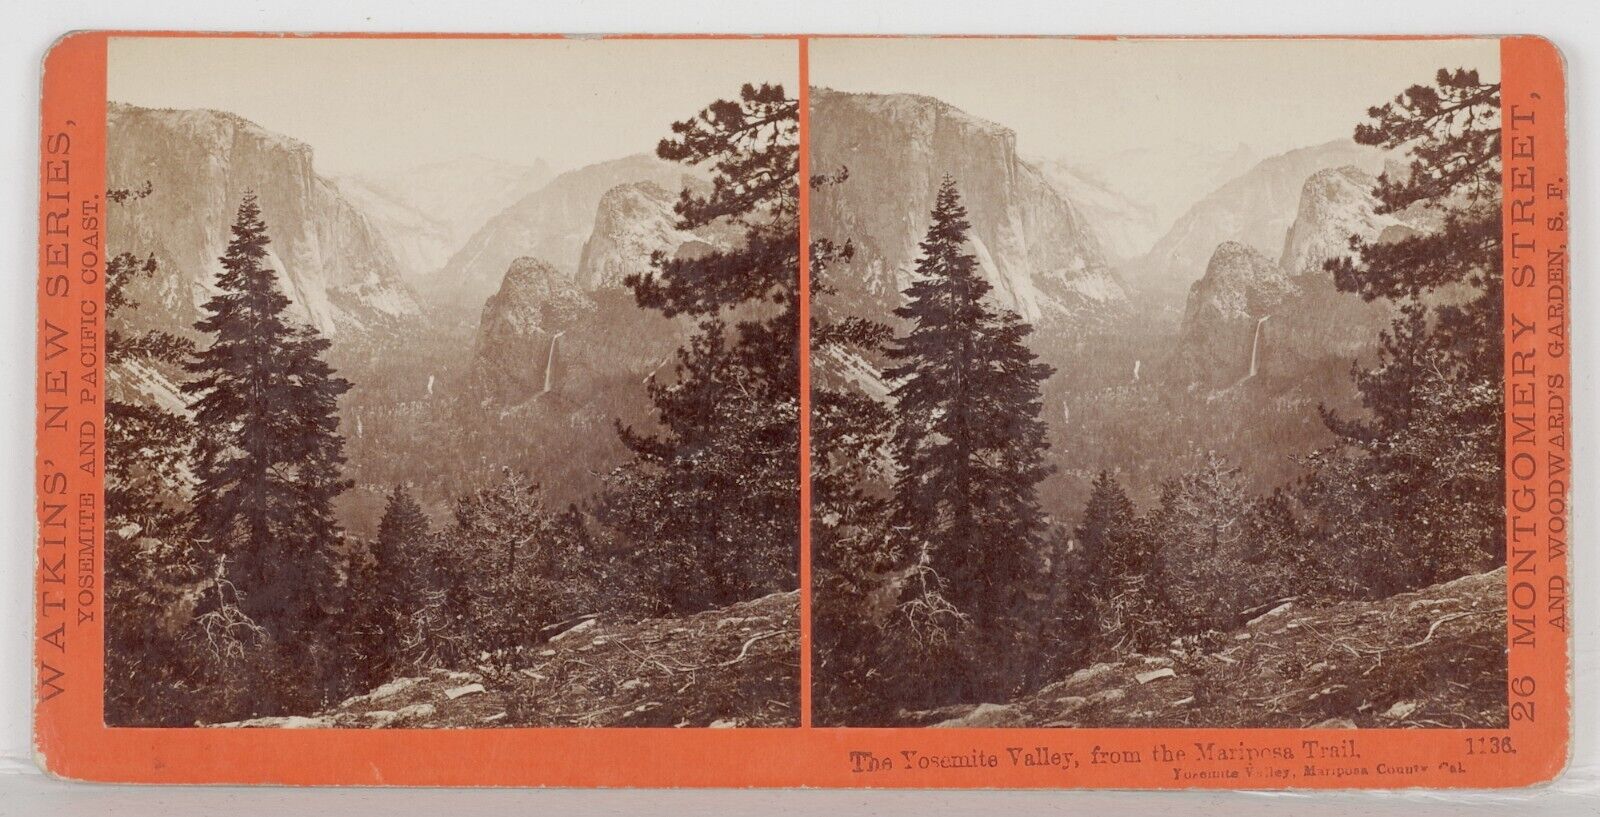 Carleton Watkins, The Yosemite Valley, from the Mariposa Trail, 1870s/80s, SV